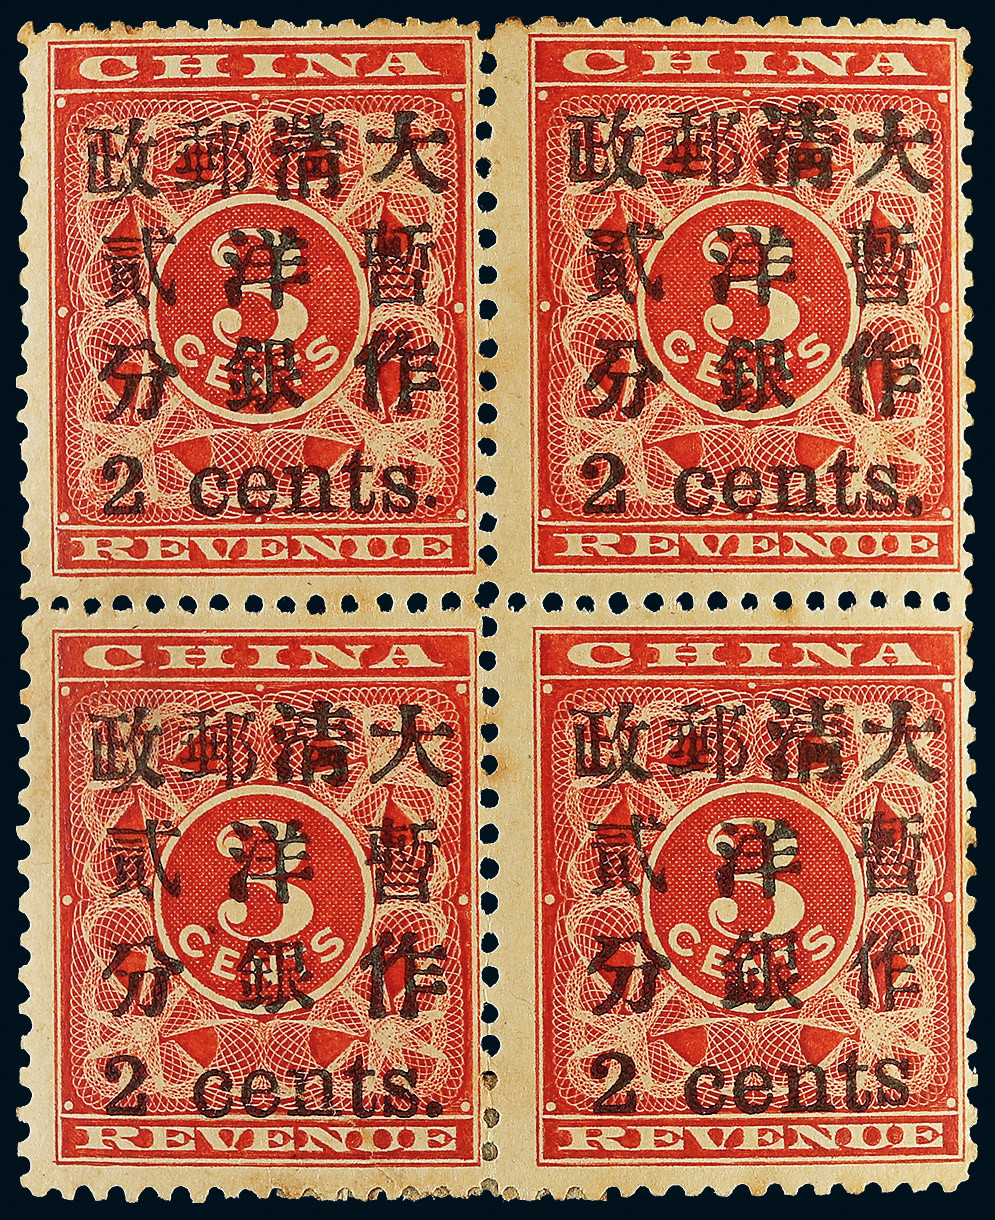 1897 Red Renvenue Small 2 Cents mint block of 4.Fine